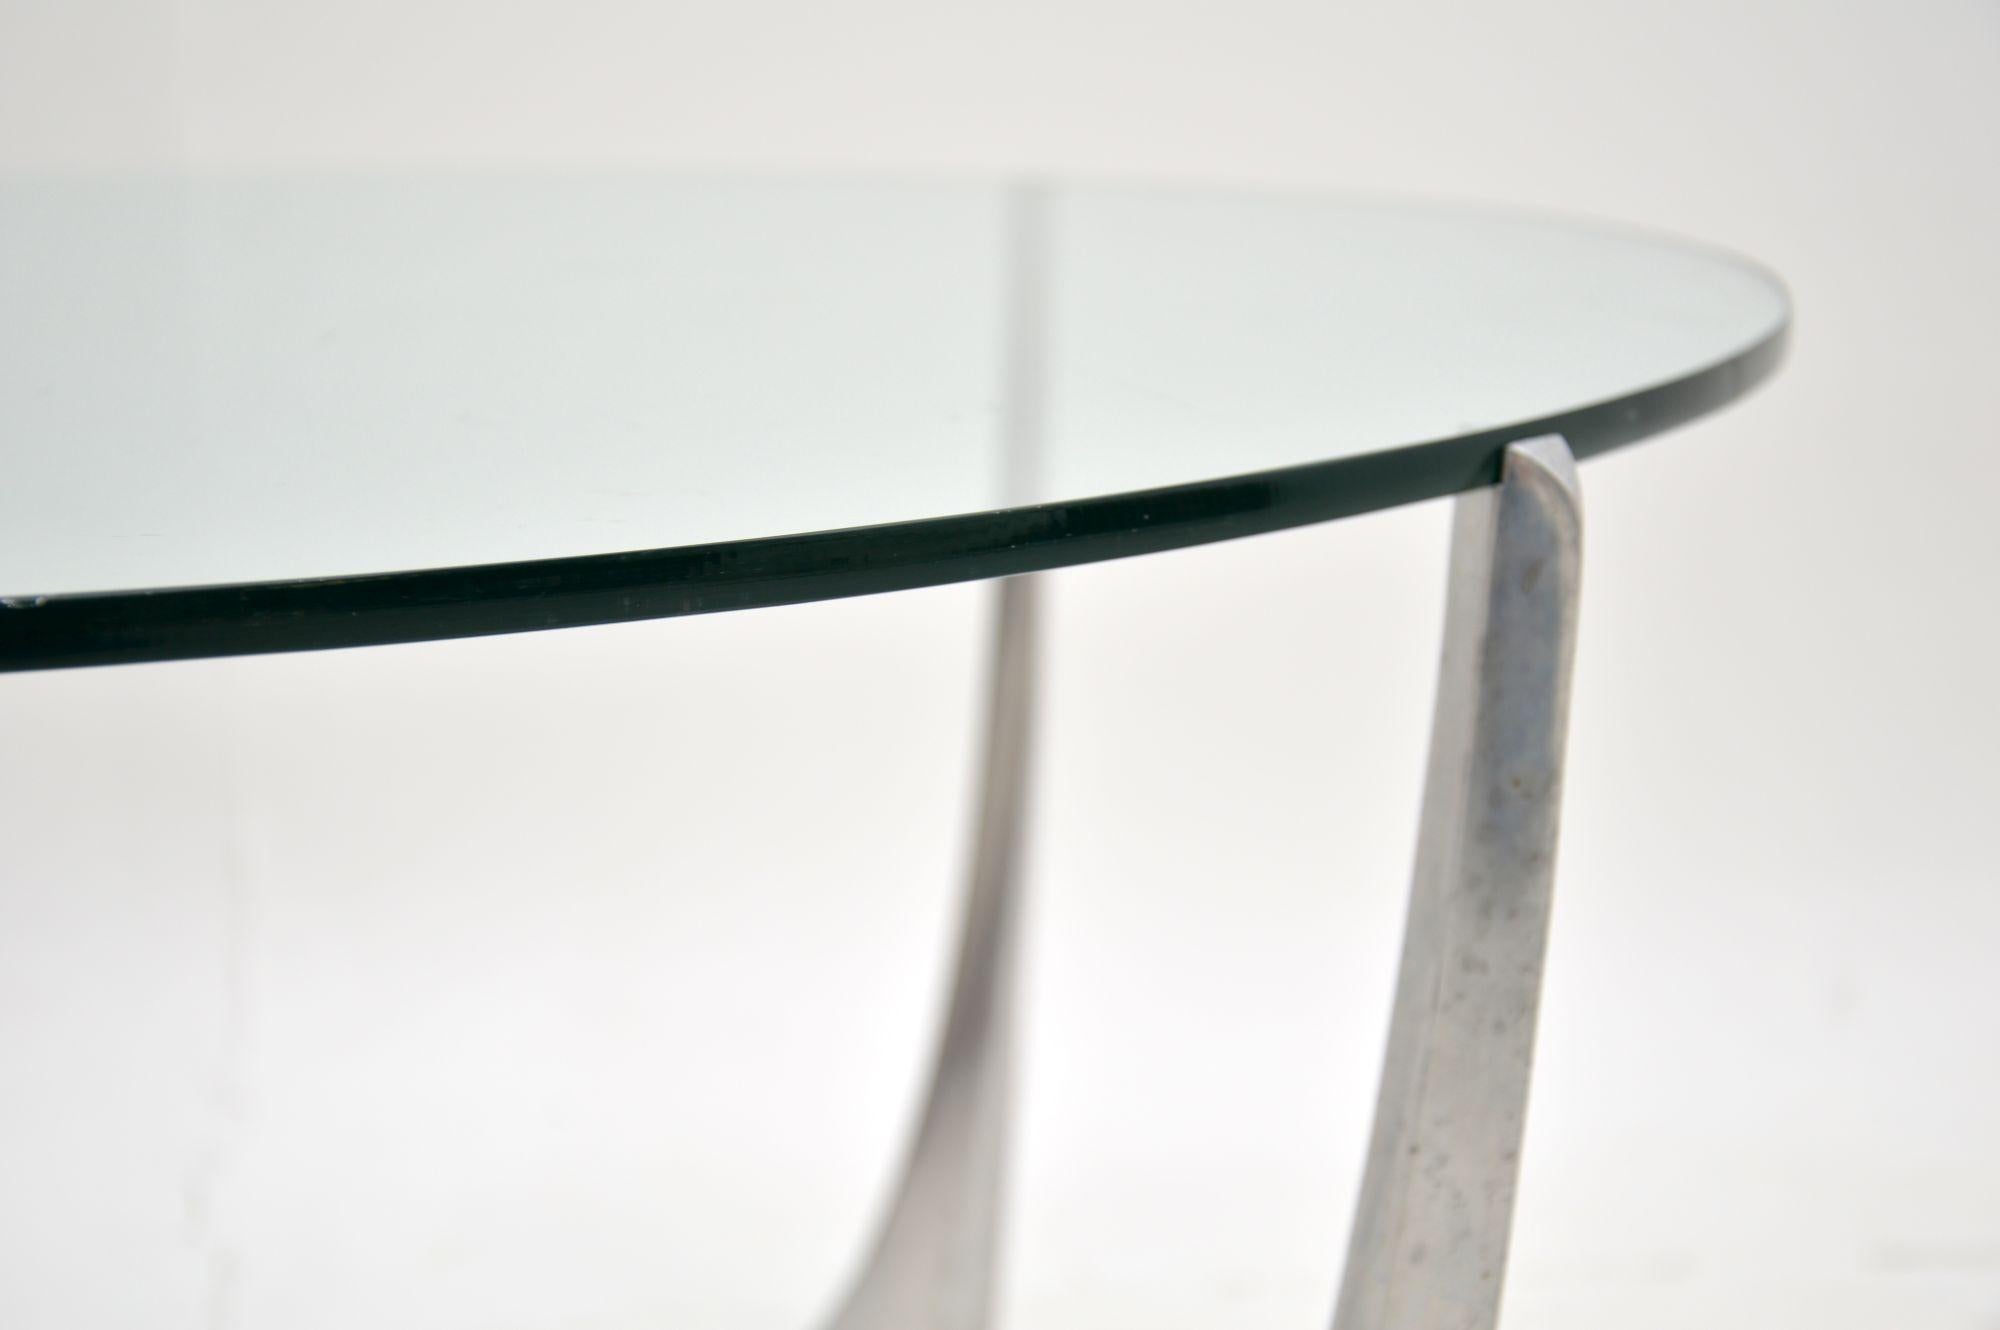 German Vintage Steel and Glass Coffee Table by Knut Hesterberg